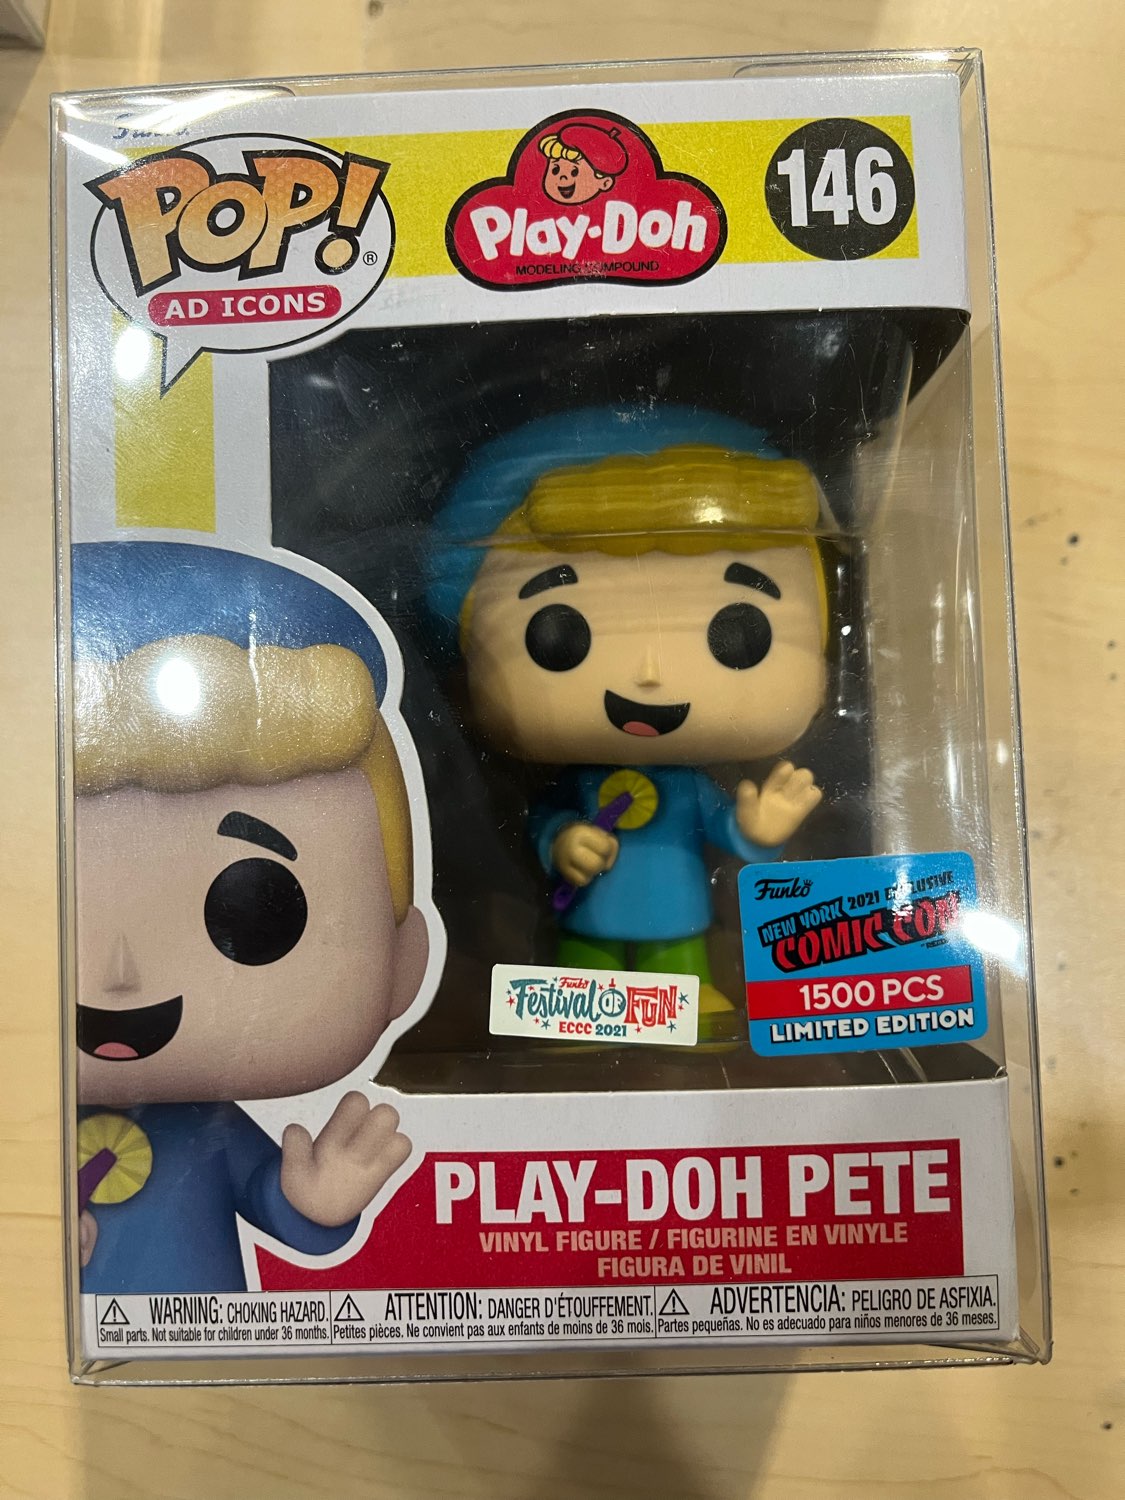 Funko Pop! Ad Icons Play-Doh #146 Play-Doh-Pete (Festival of Fun ECCC 2021) (NYCC 1500 PC)